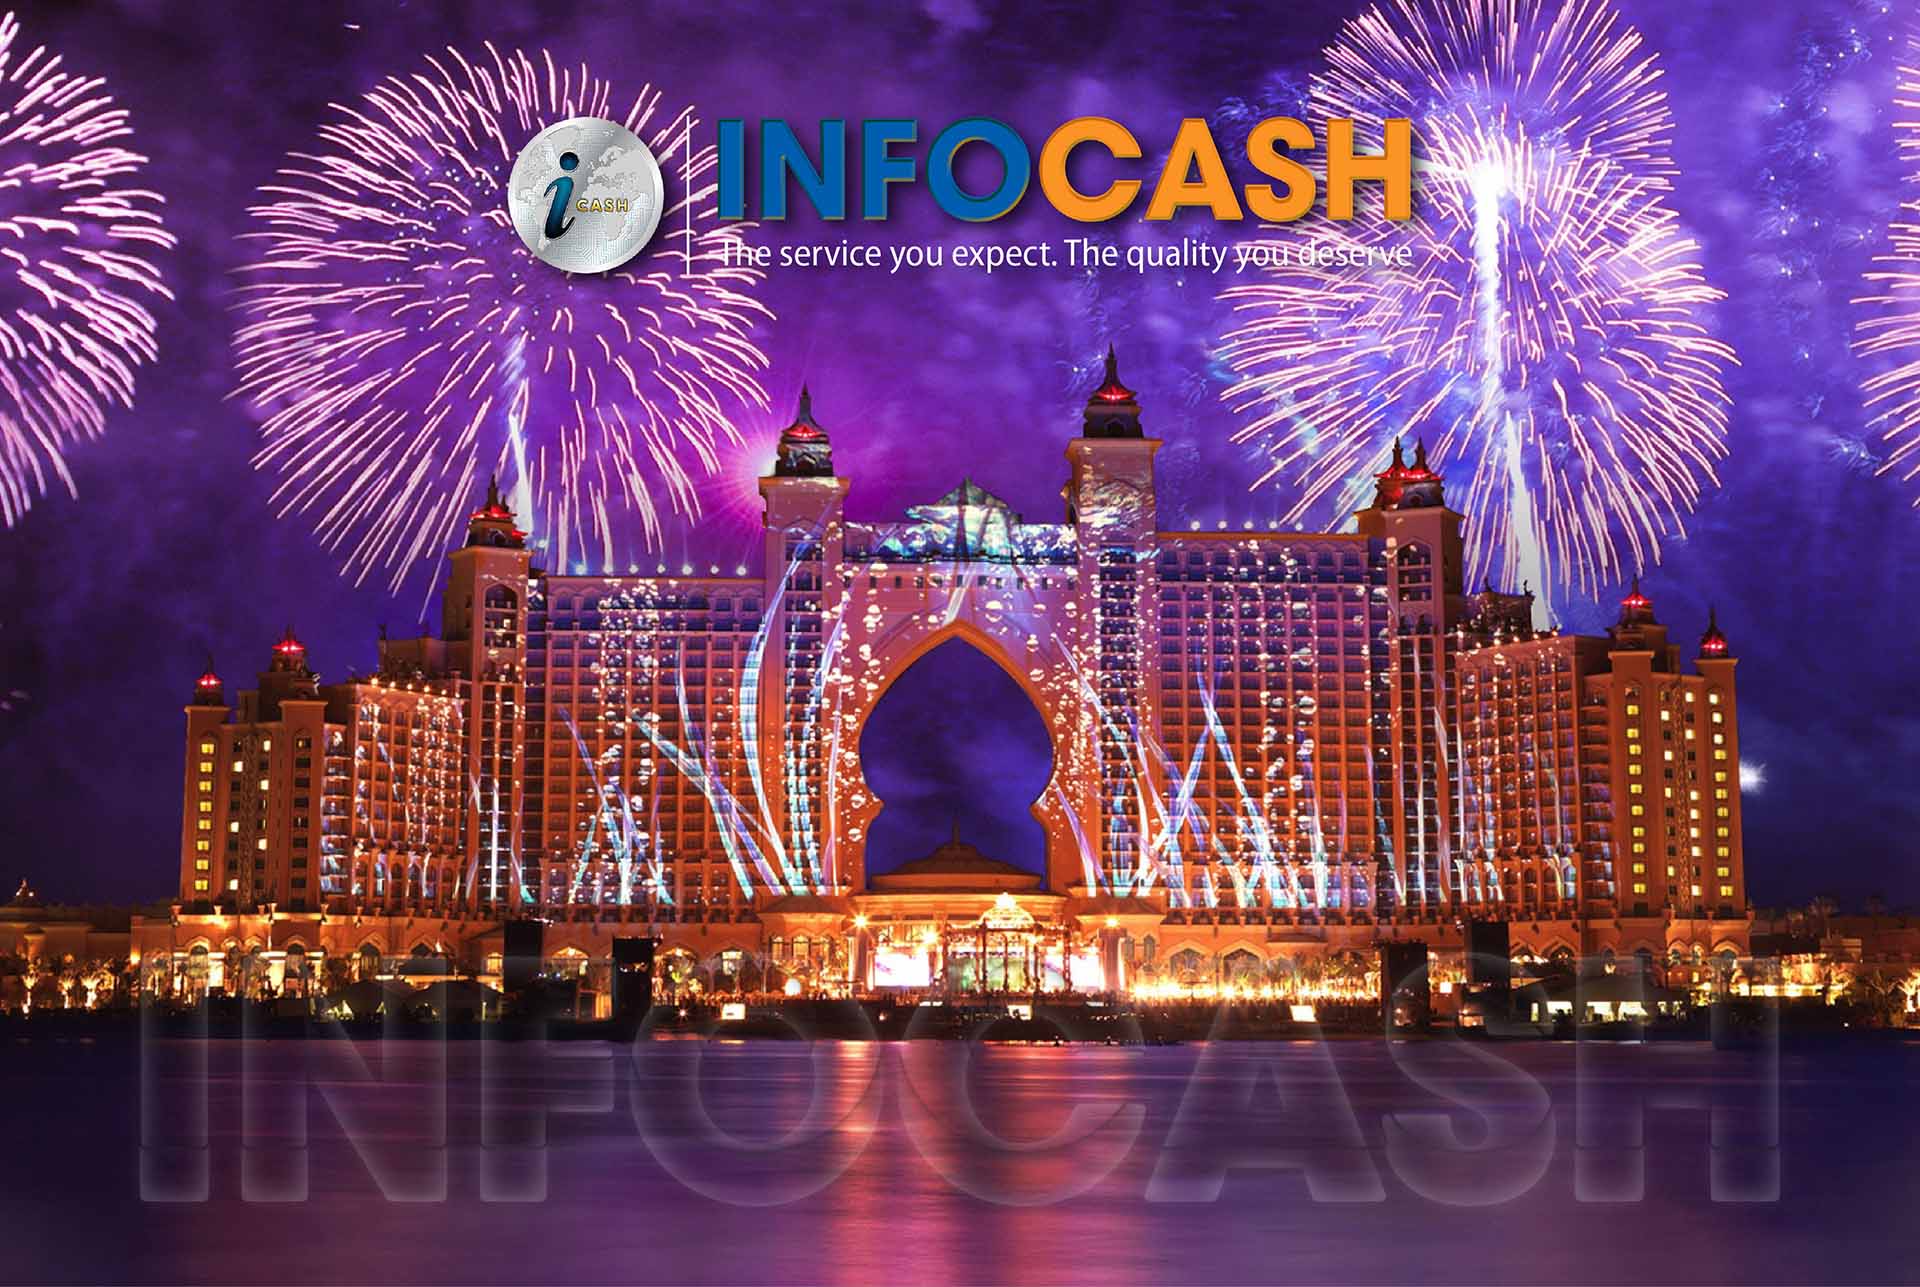 Infocash Brings Solution for Hotel Service and International Payment